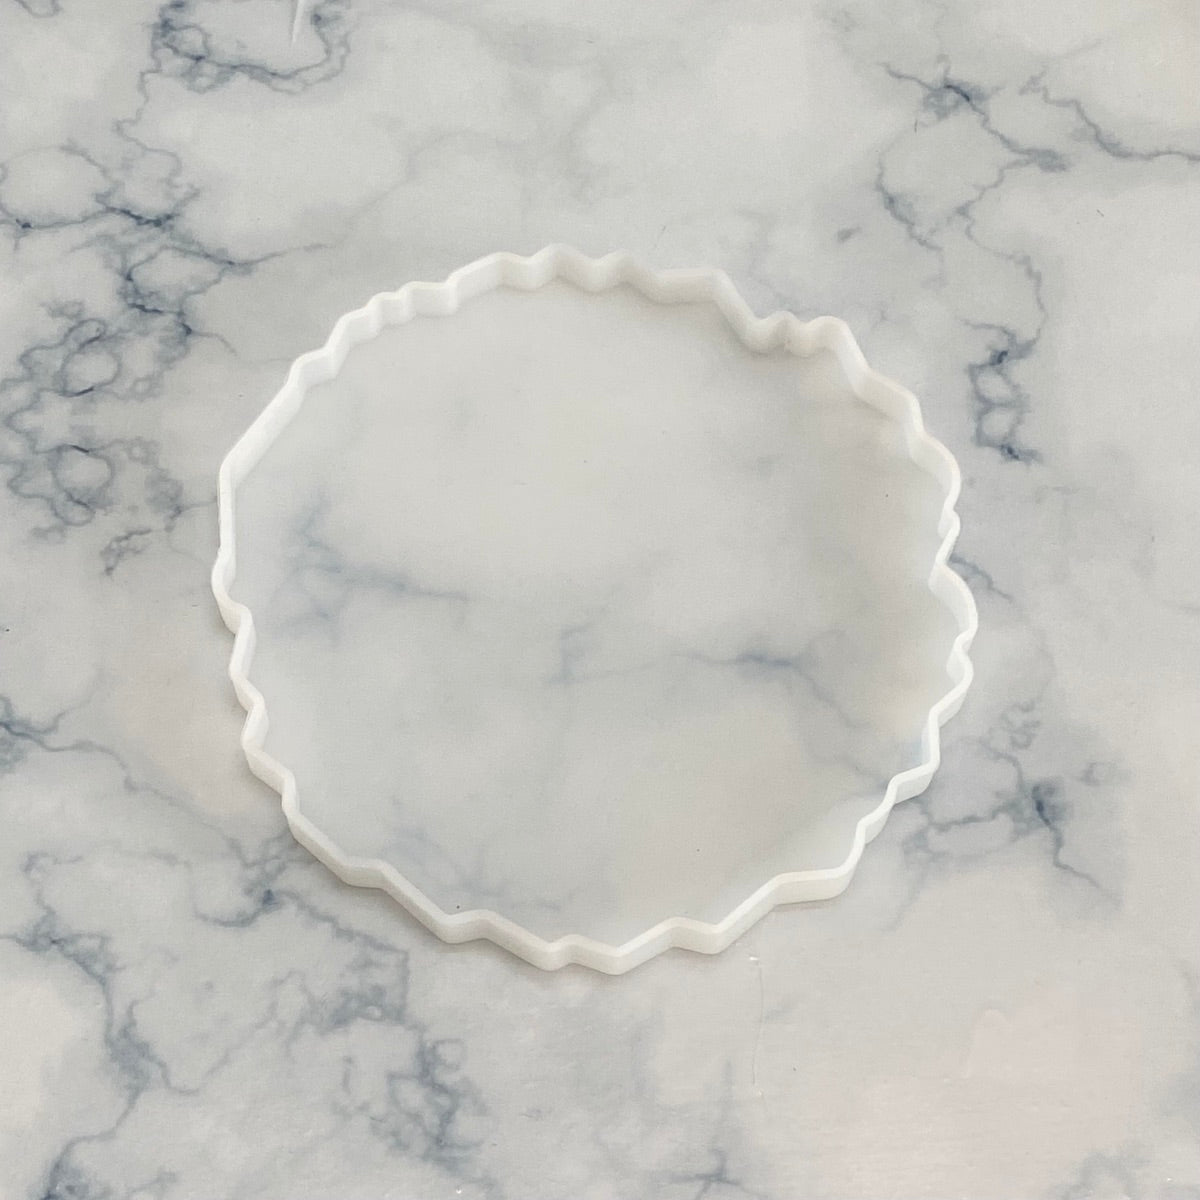 6 Inch agate coaster mould - Pack of 12